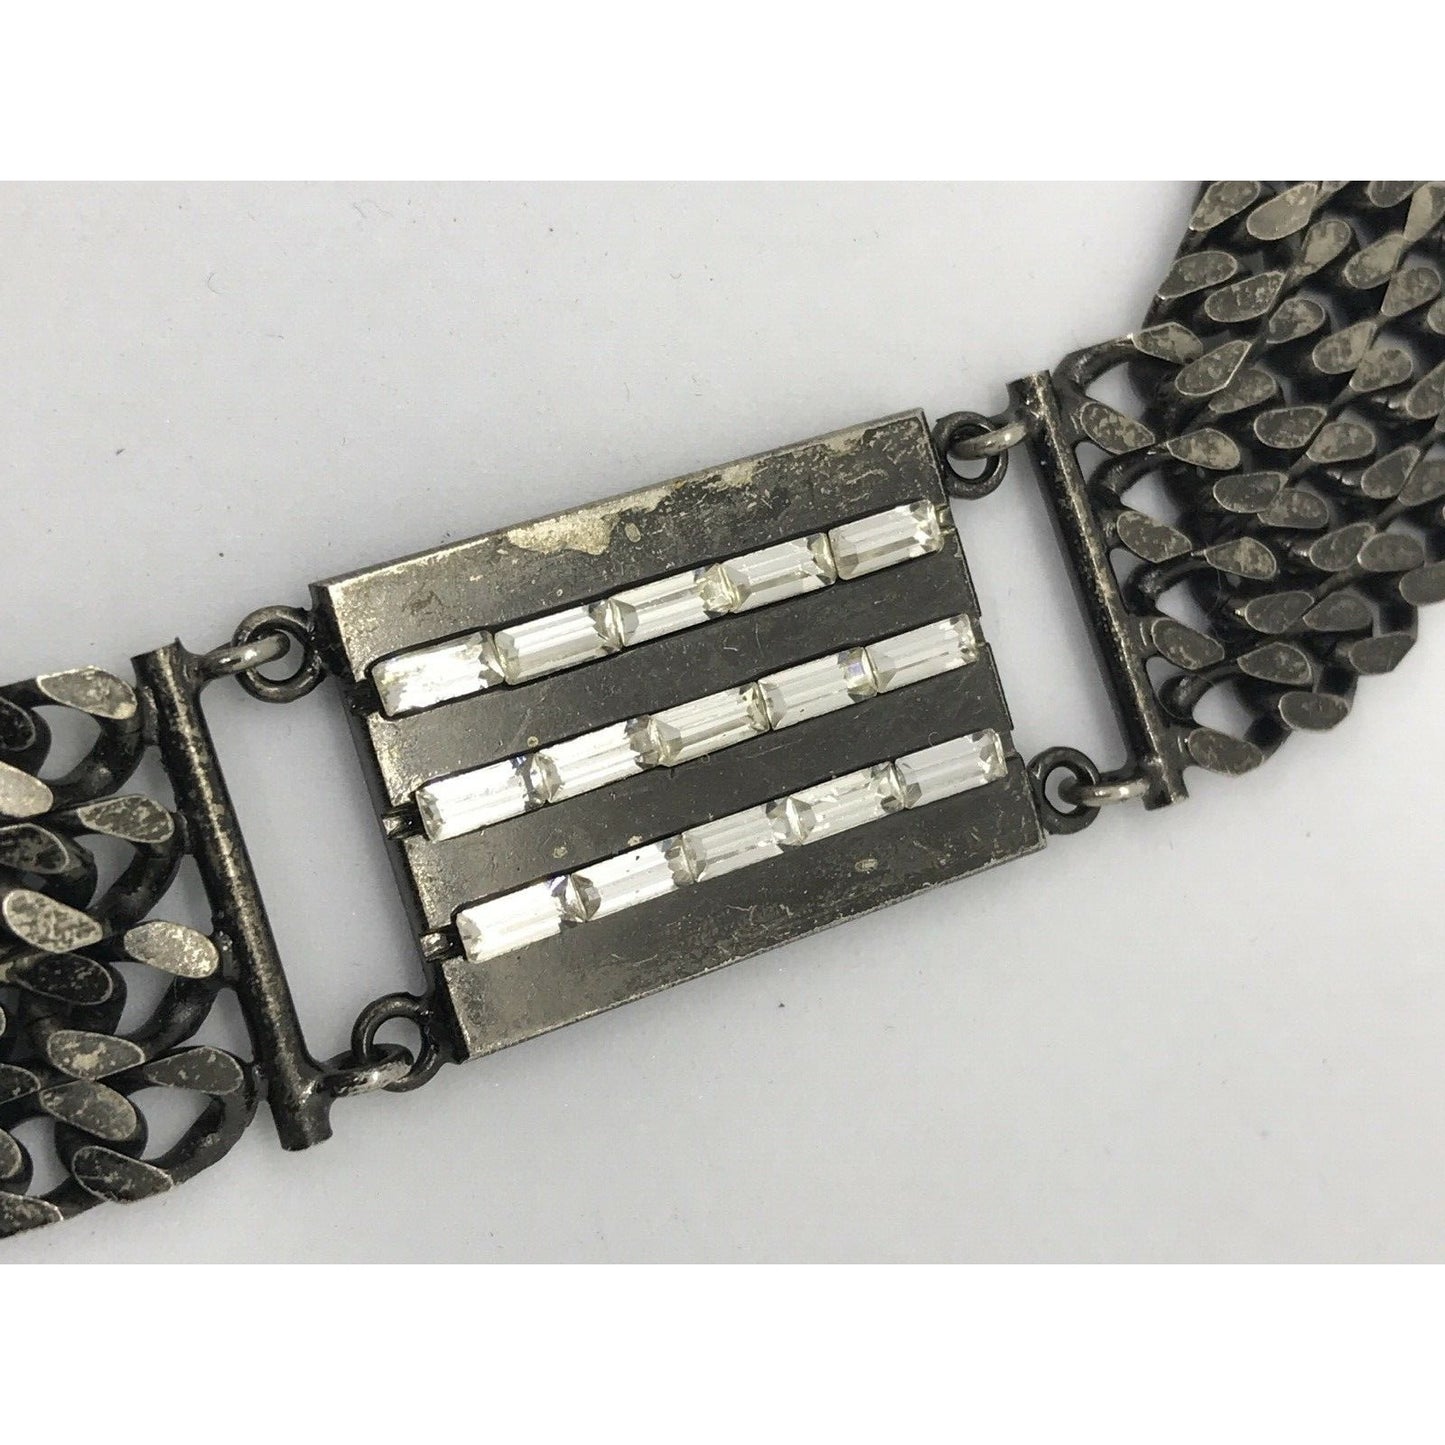 Vintage Gucci sterling silver chain belt with clear rhinestone crystals and a petite GG clasp/buckle